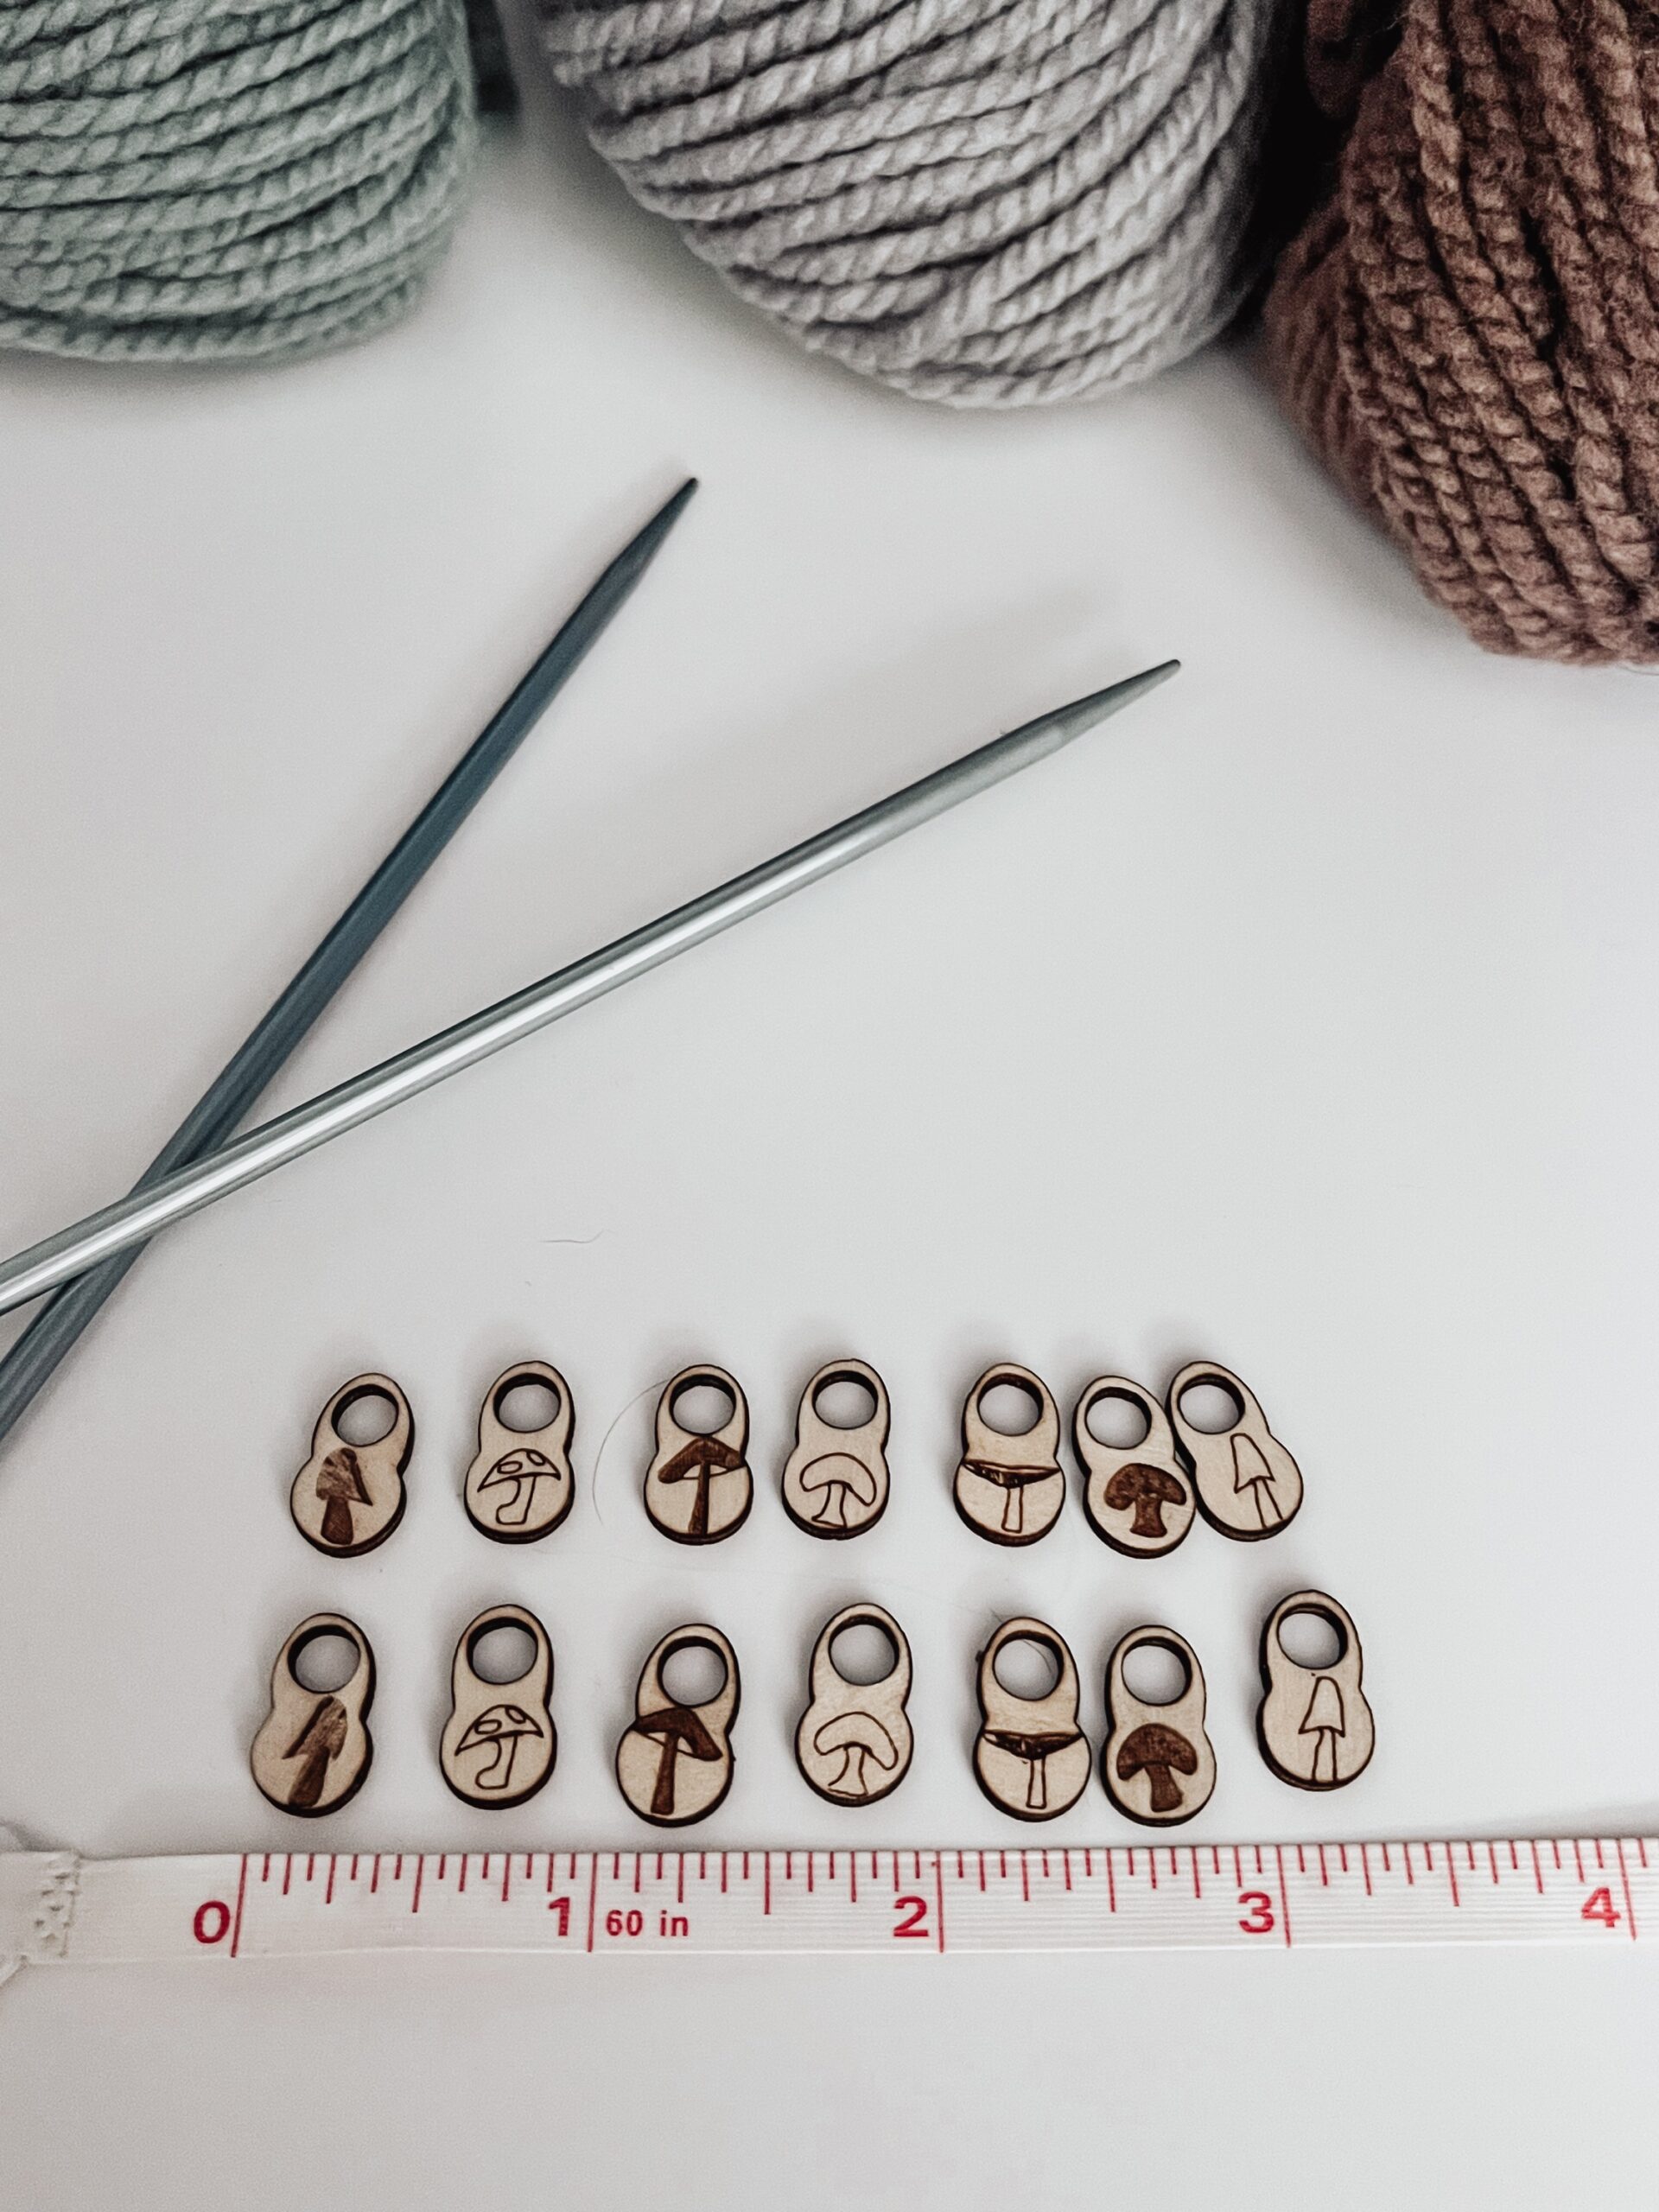 A total of 14 wood stitch markers with a variety of hand-drawn mushroom designs are displayed next to a measuring tape that shows they're approximately 1/4" wide. A pair of metal knitting needles and three skeins of merino yarn are in the background.